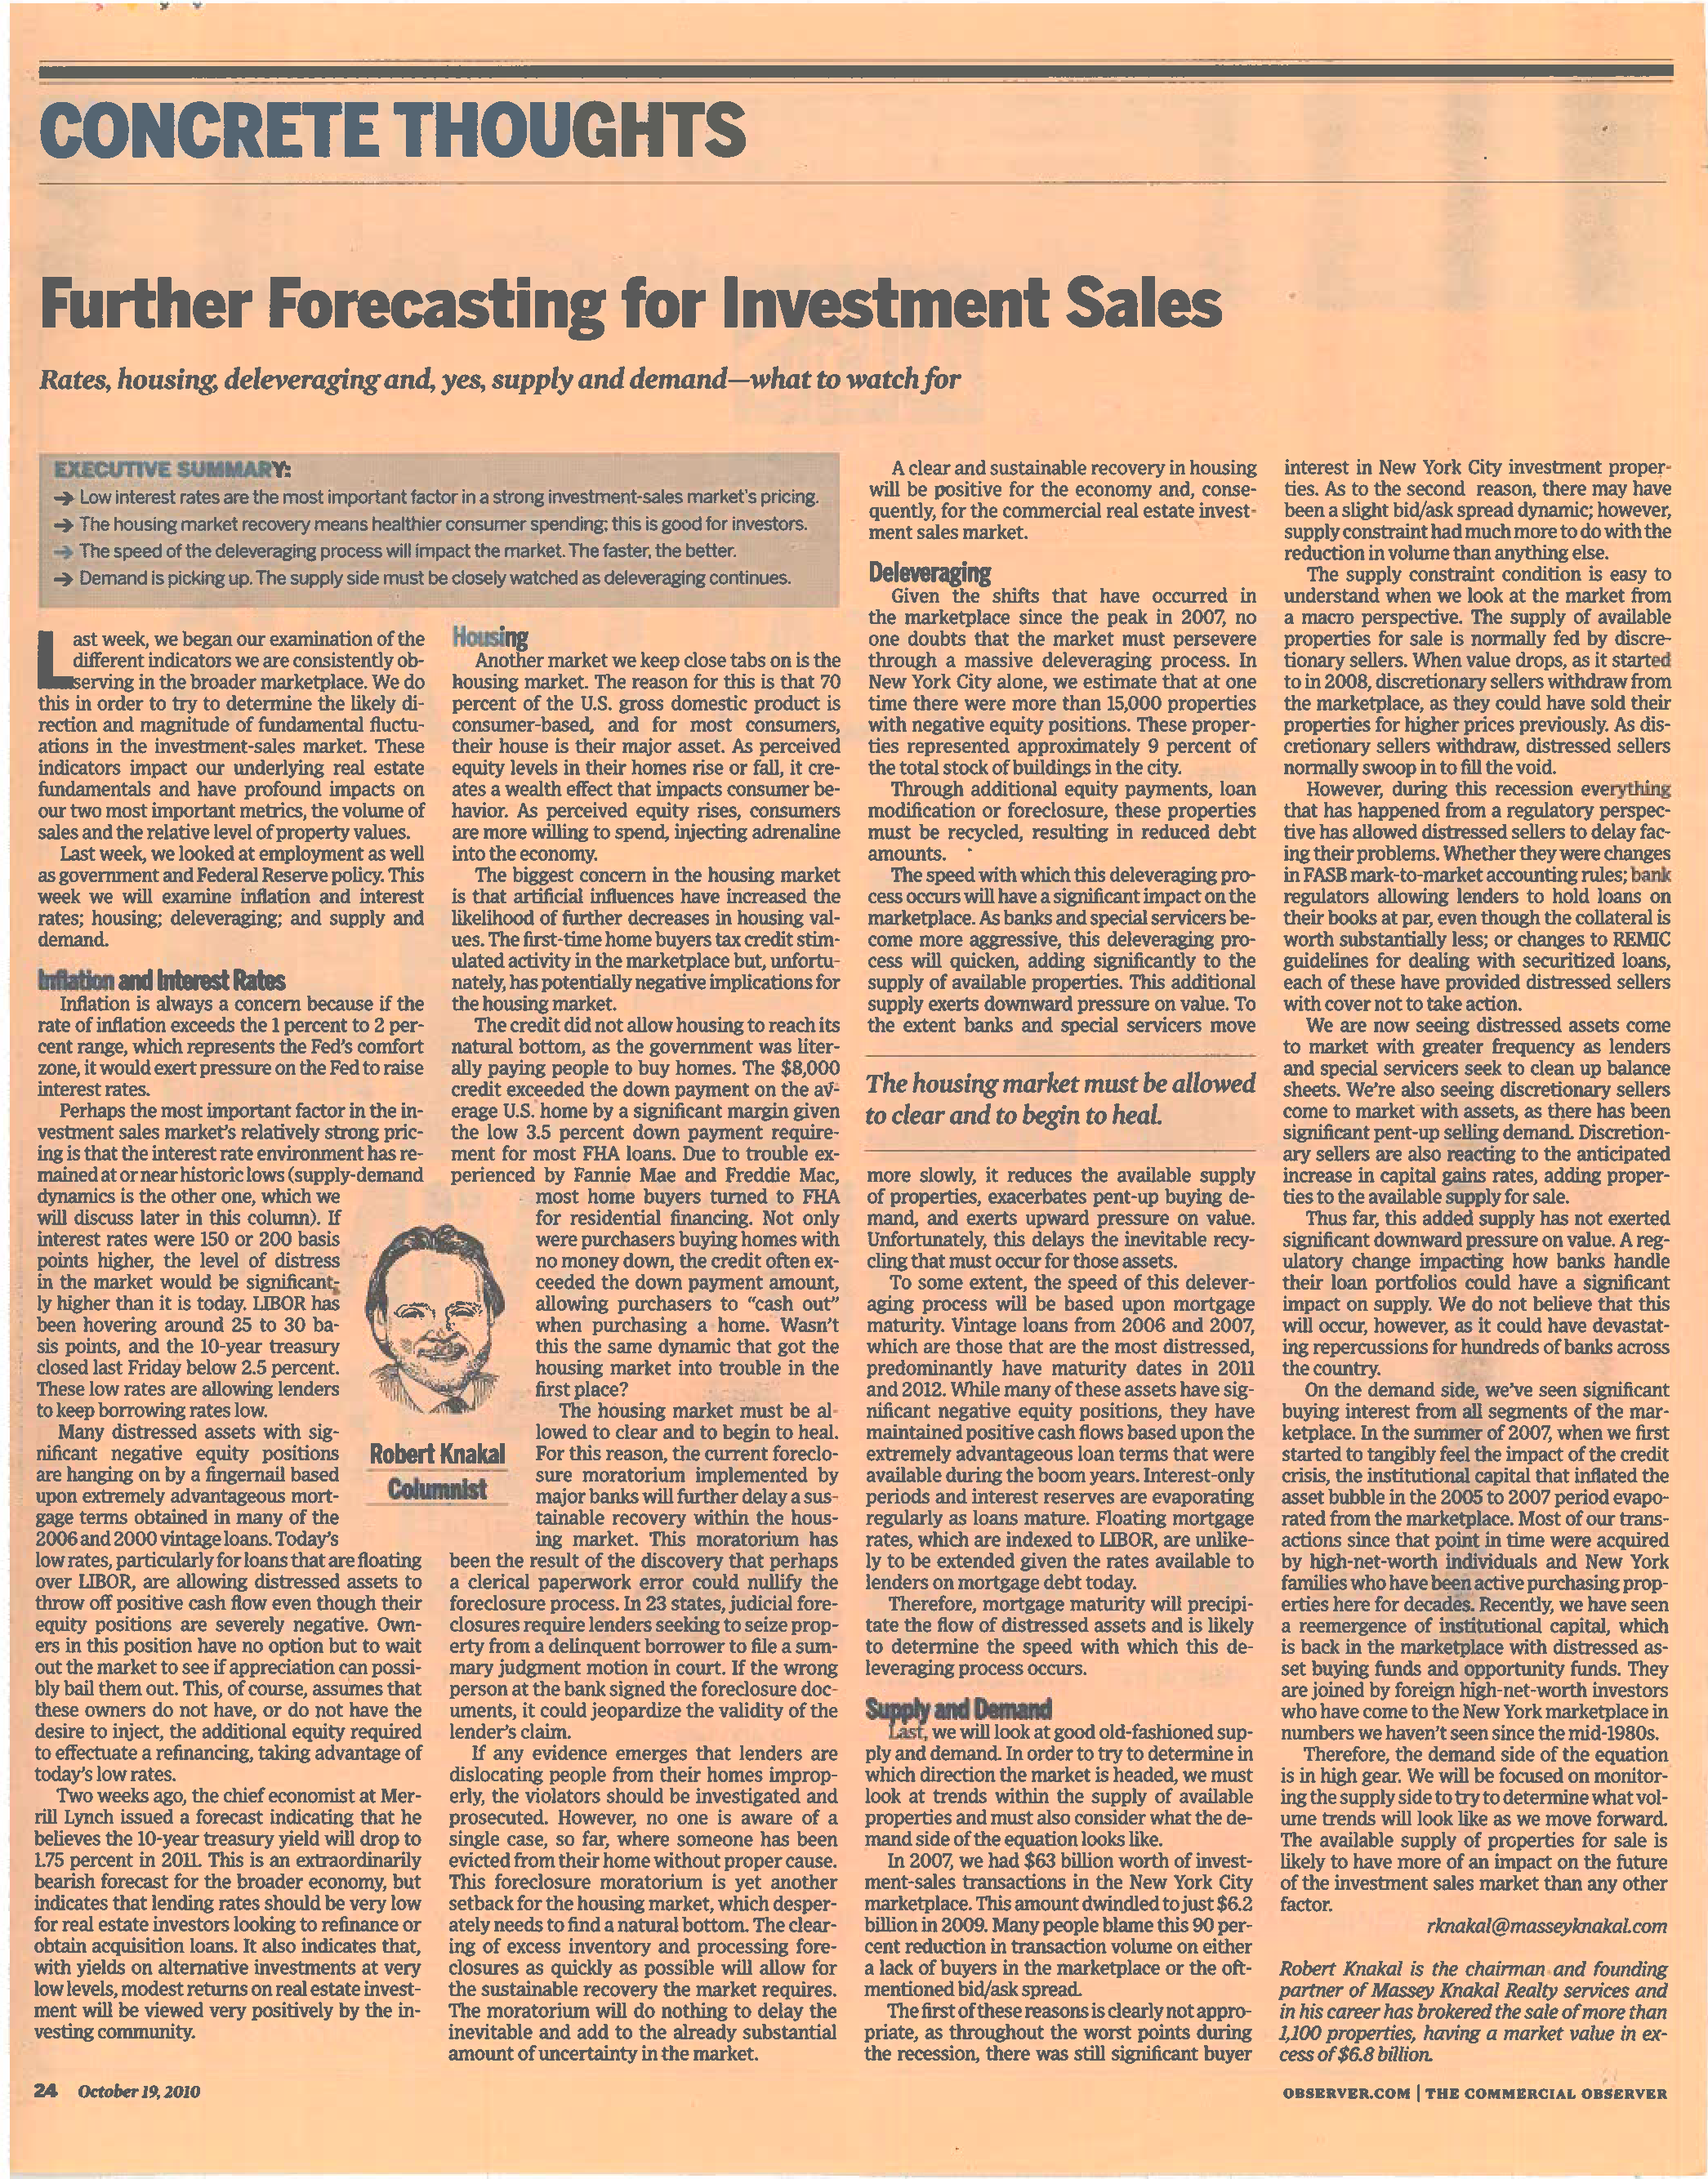 Concrete Thoughts - Further Forecasting for Investment Sales - Oct 19 2010